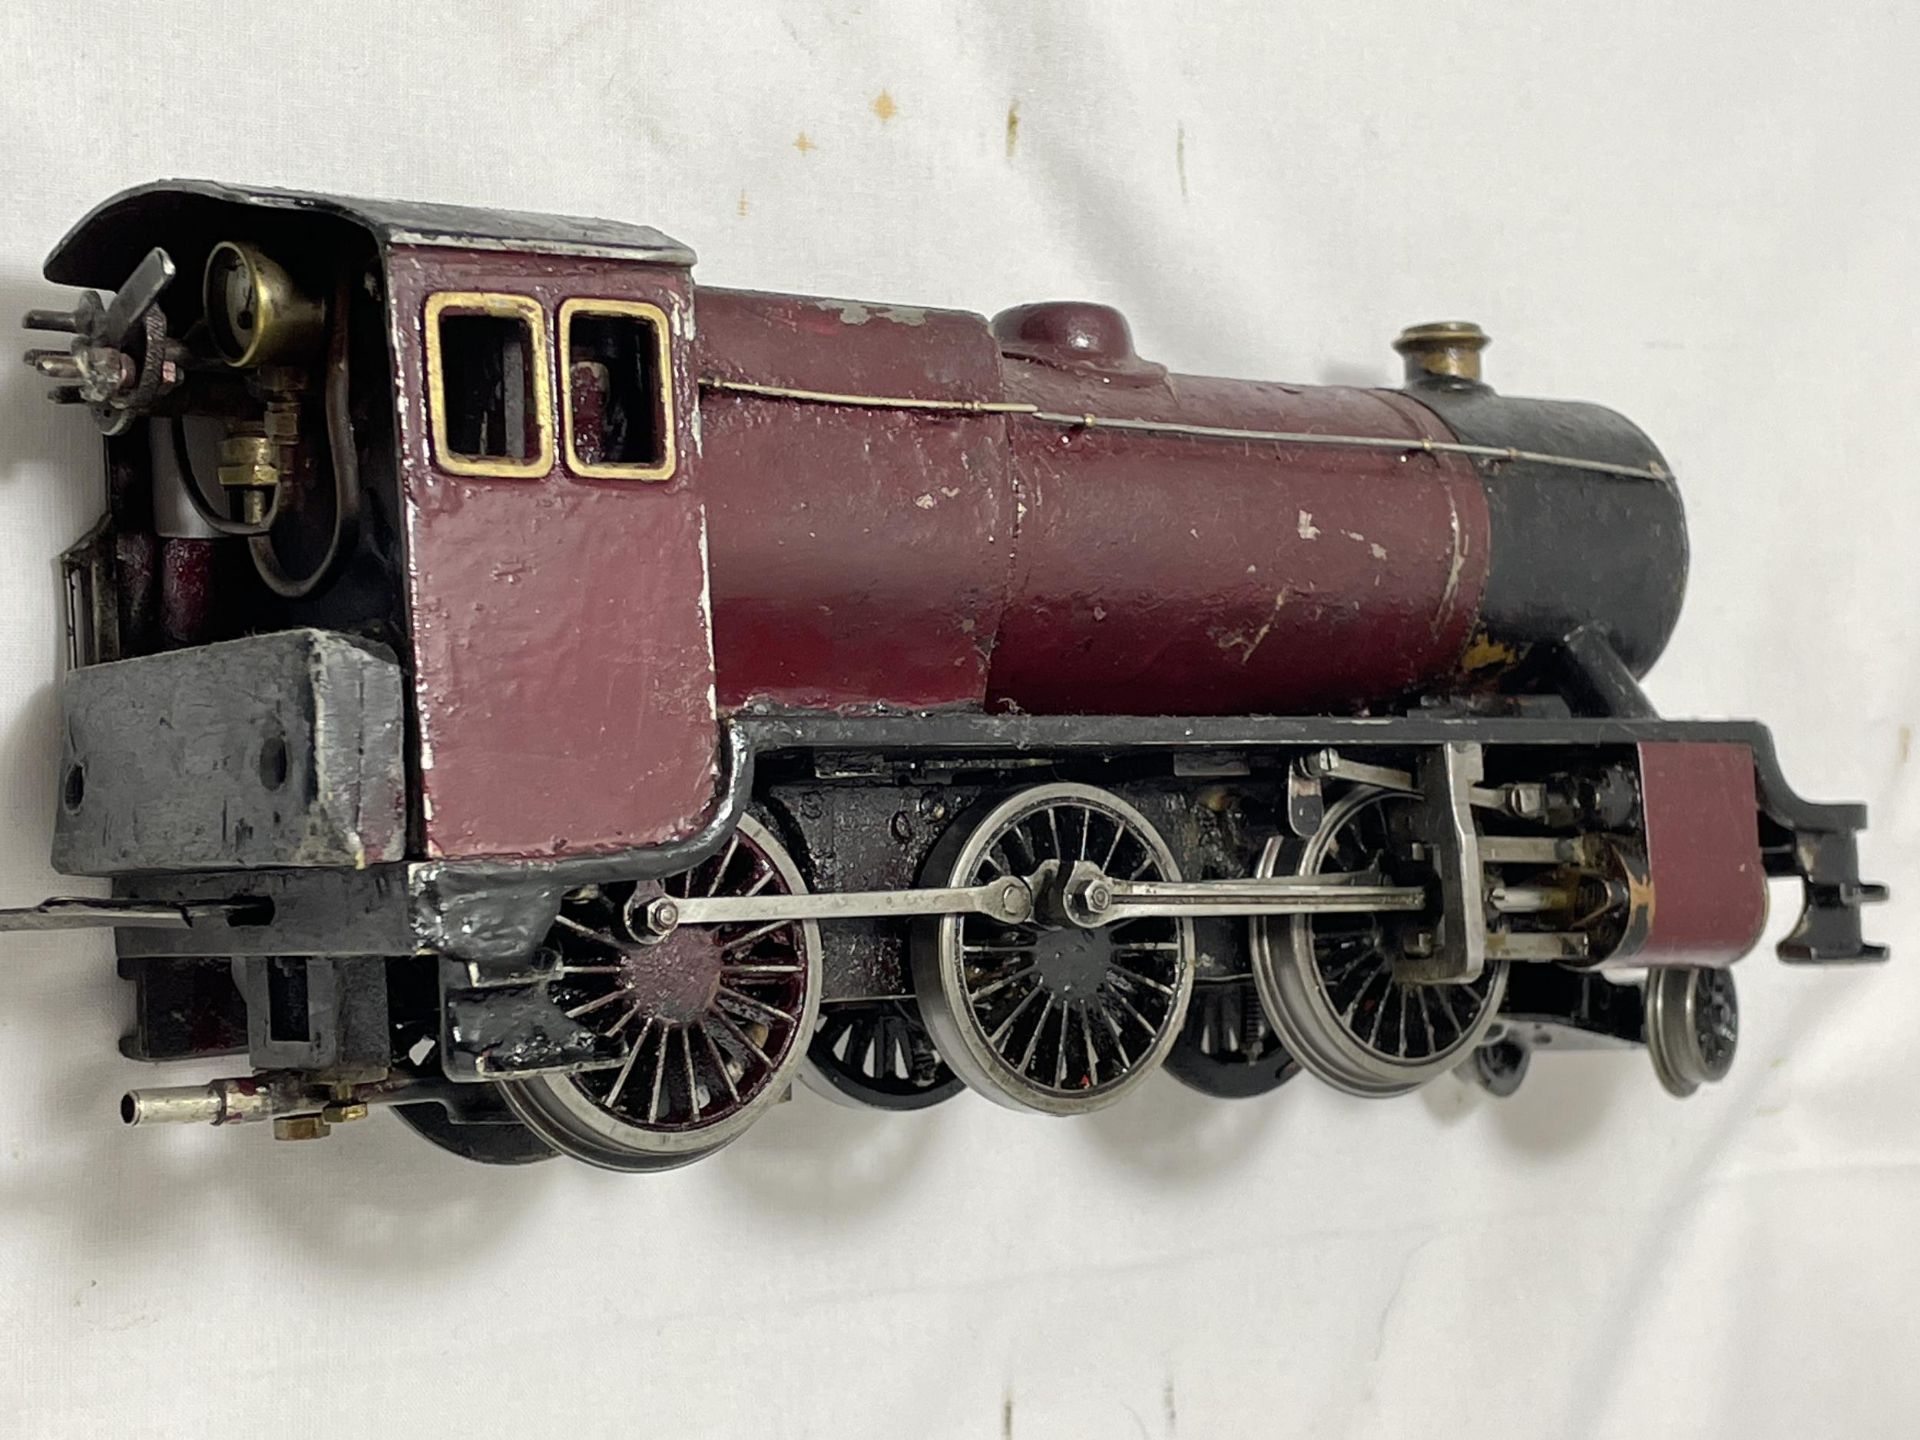 A SCRATCH BUILT LIVE STEAM 30 MM GAUGE 2-6-0 MODEL RAILWAY LOCOMOTIVE NUMBER 13270 IN MAROON AND - Image 2 of 5